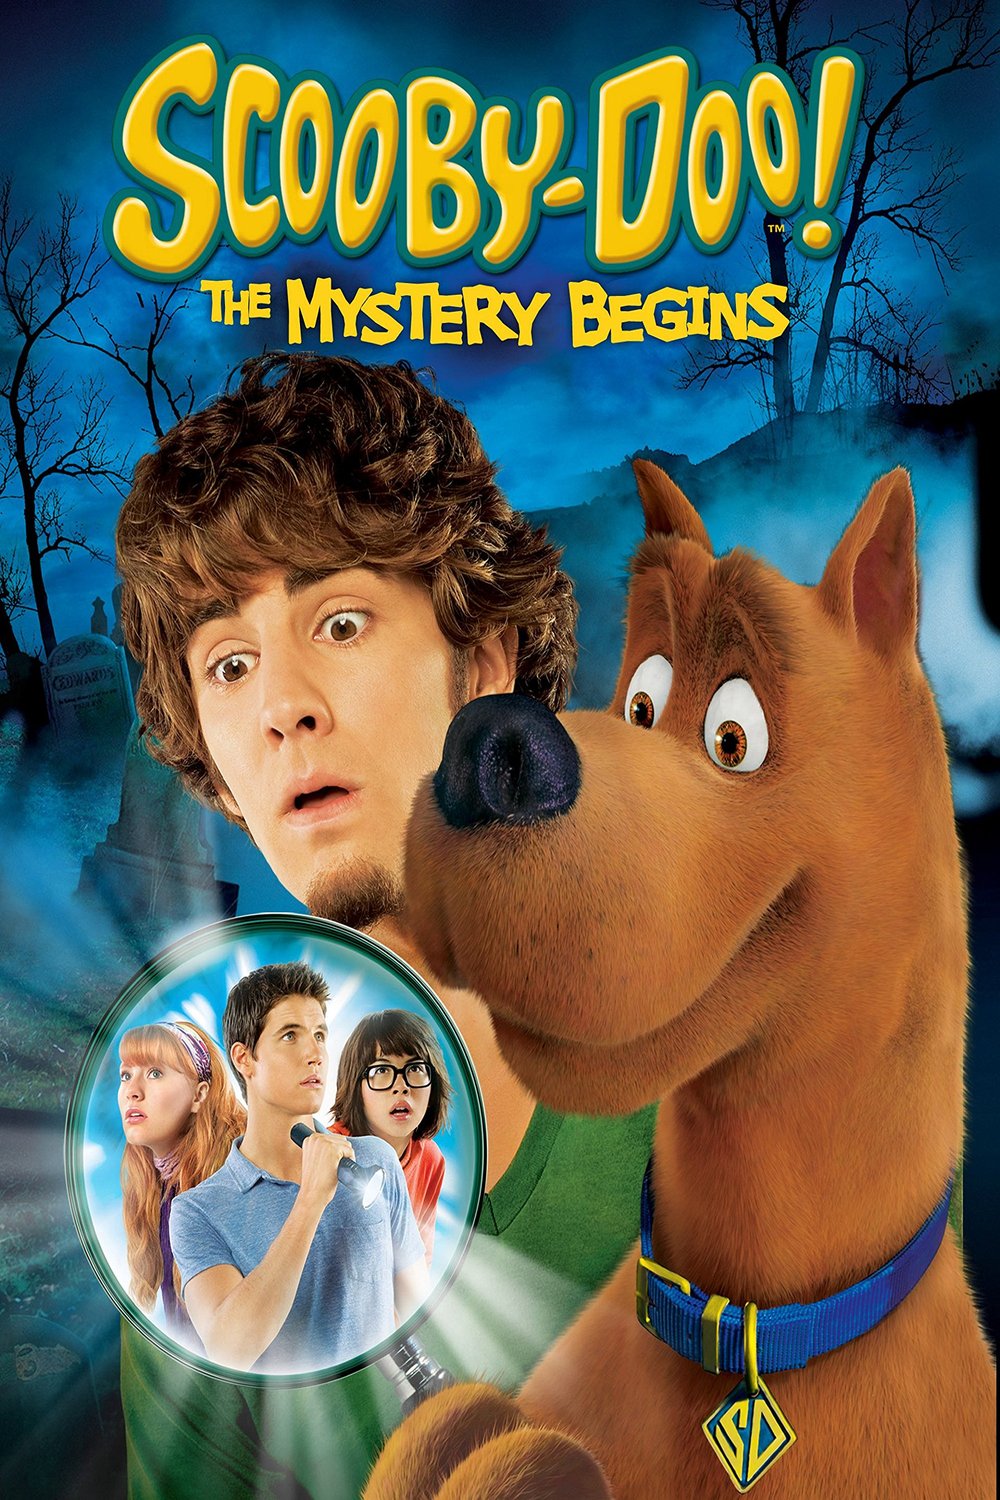 Poster of the movie Scooby-Doo! The Mystery Begins